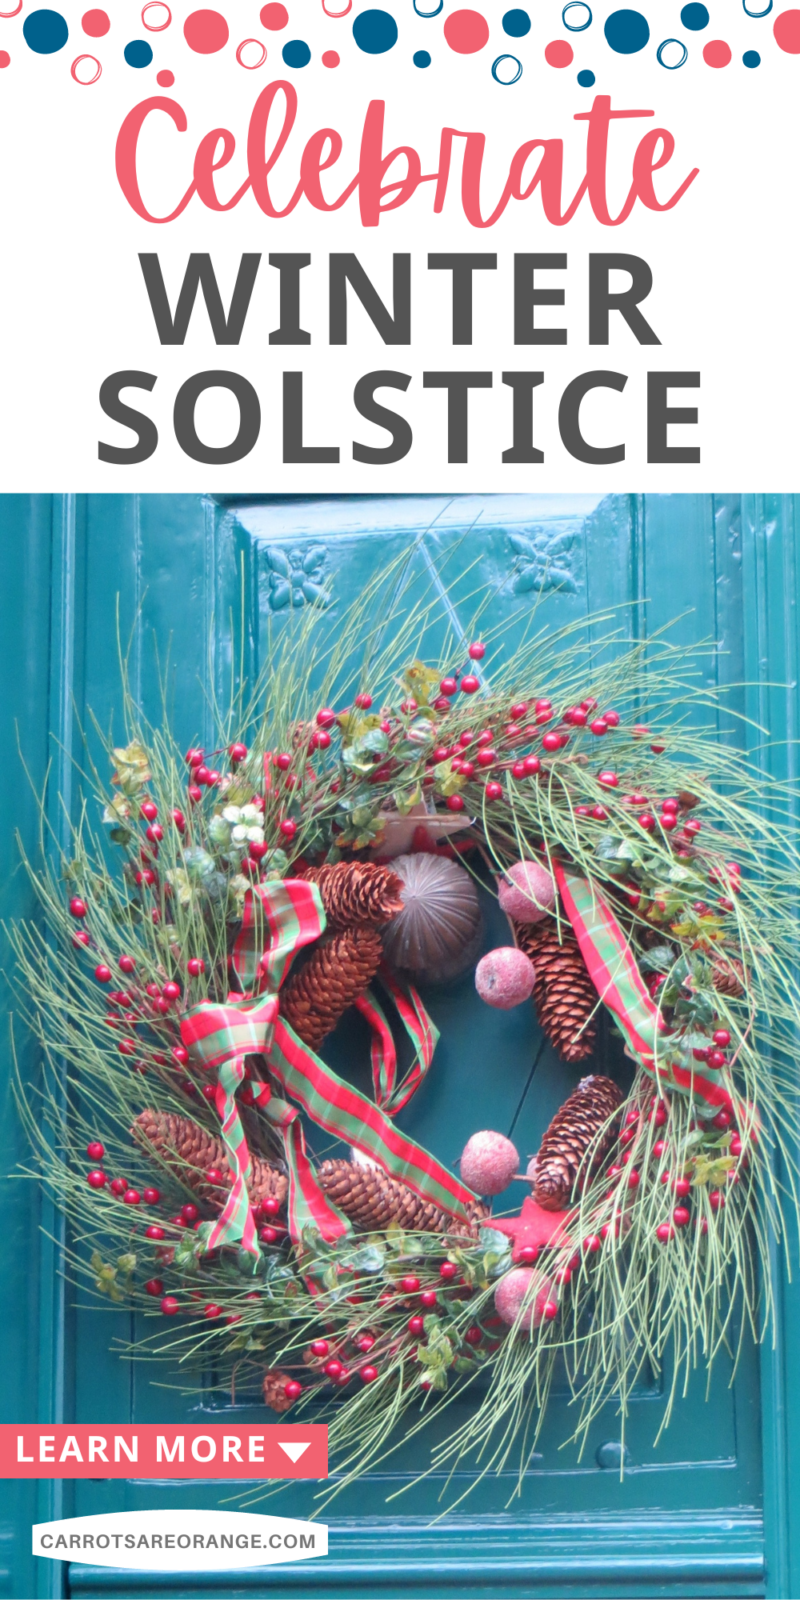 Celebrate Winter Solstice with Kids